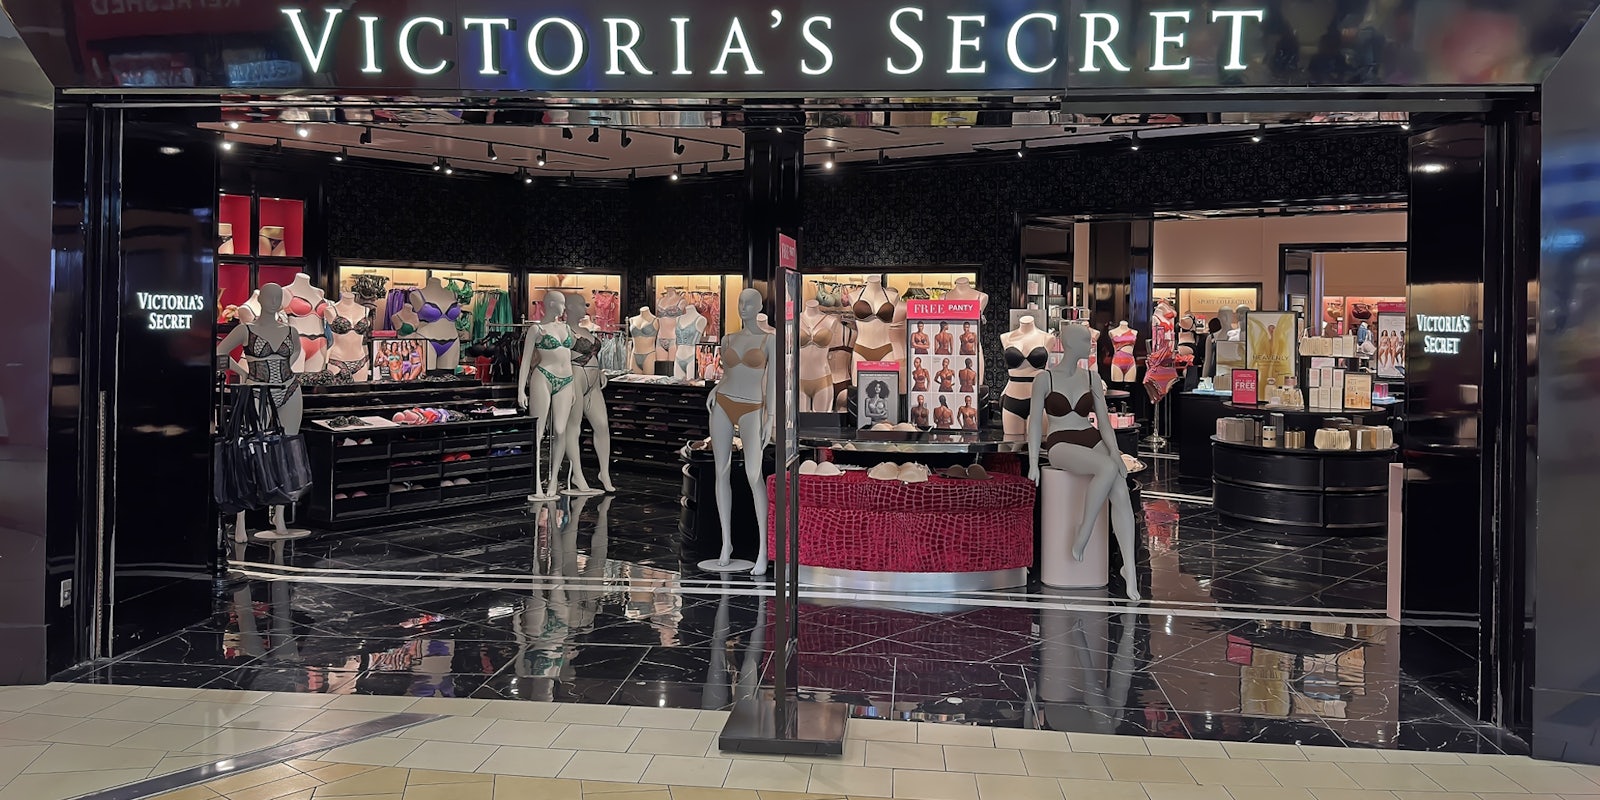 Victoria Secret is having financial troubles and is reportedly going back  to its core business and marketing strategies to do a brand tur